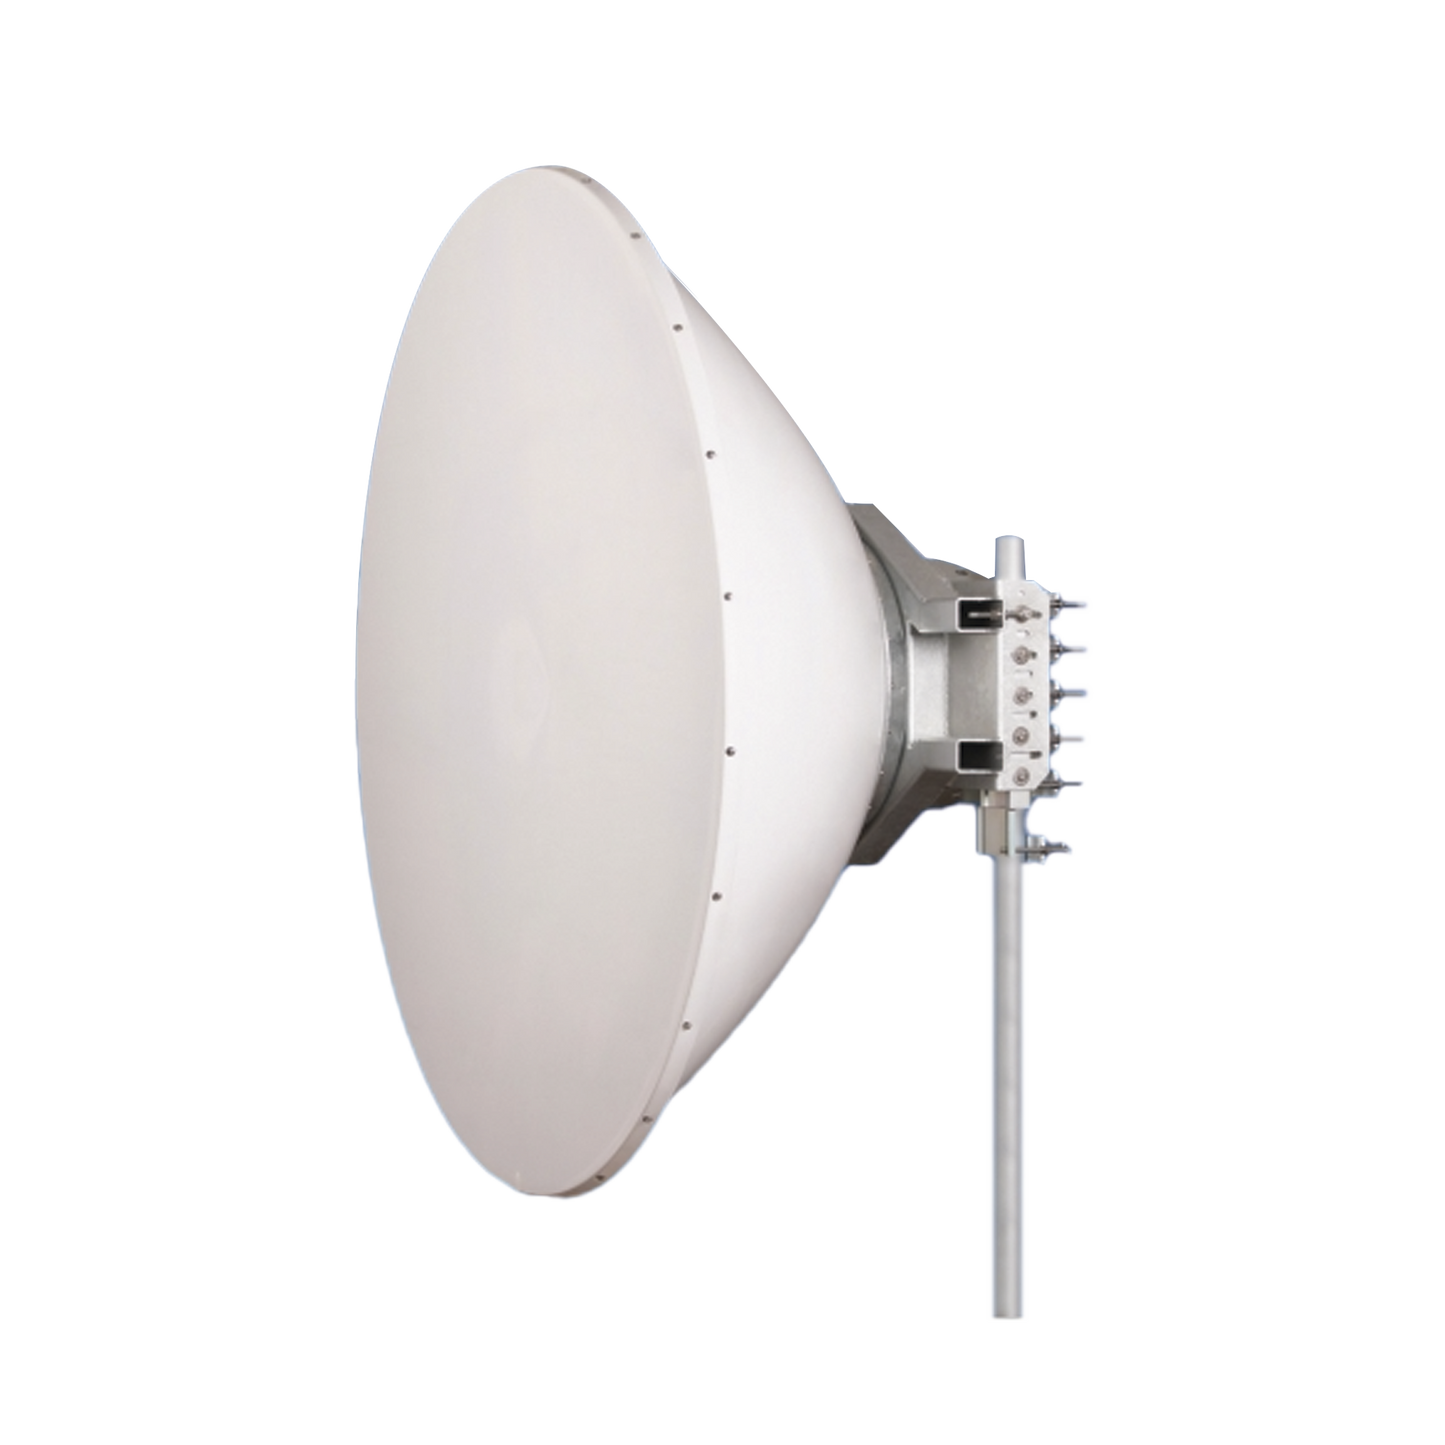 6-ft directional antenna, frequency (4.9 to 6.1 GHz), 38 dBi gain, Stainless steel bracket, 90º and 45º polarity, includes mounting.